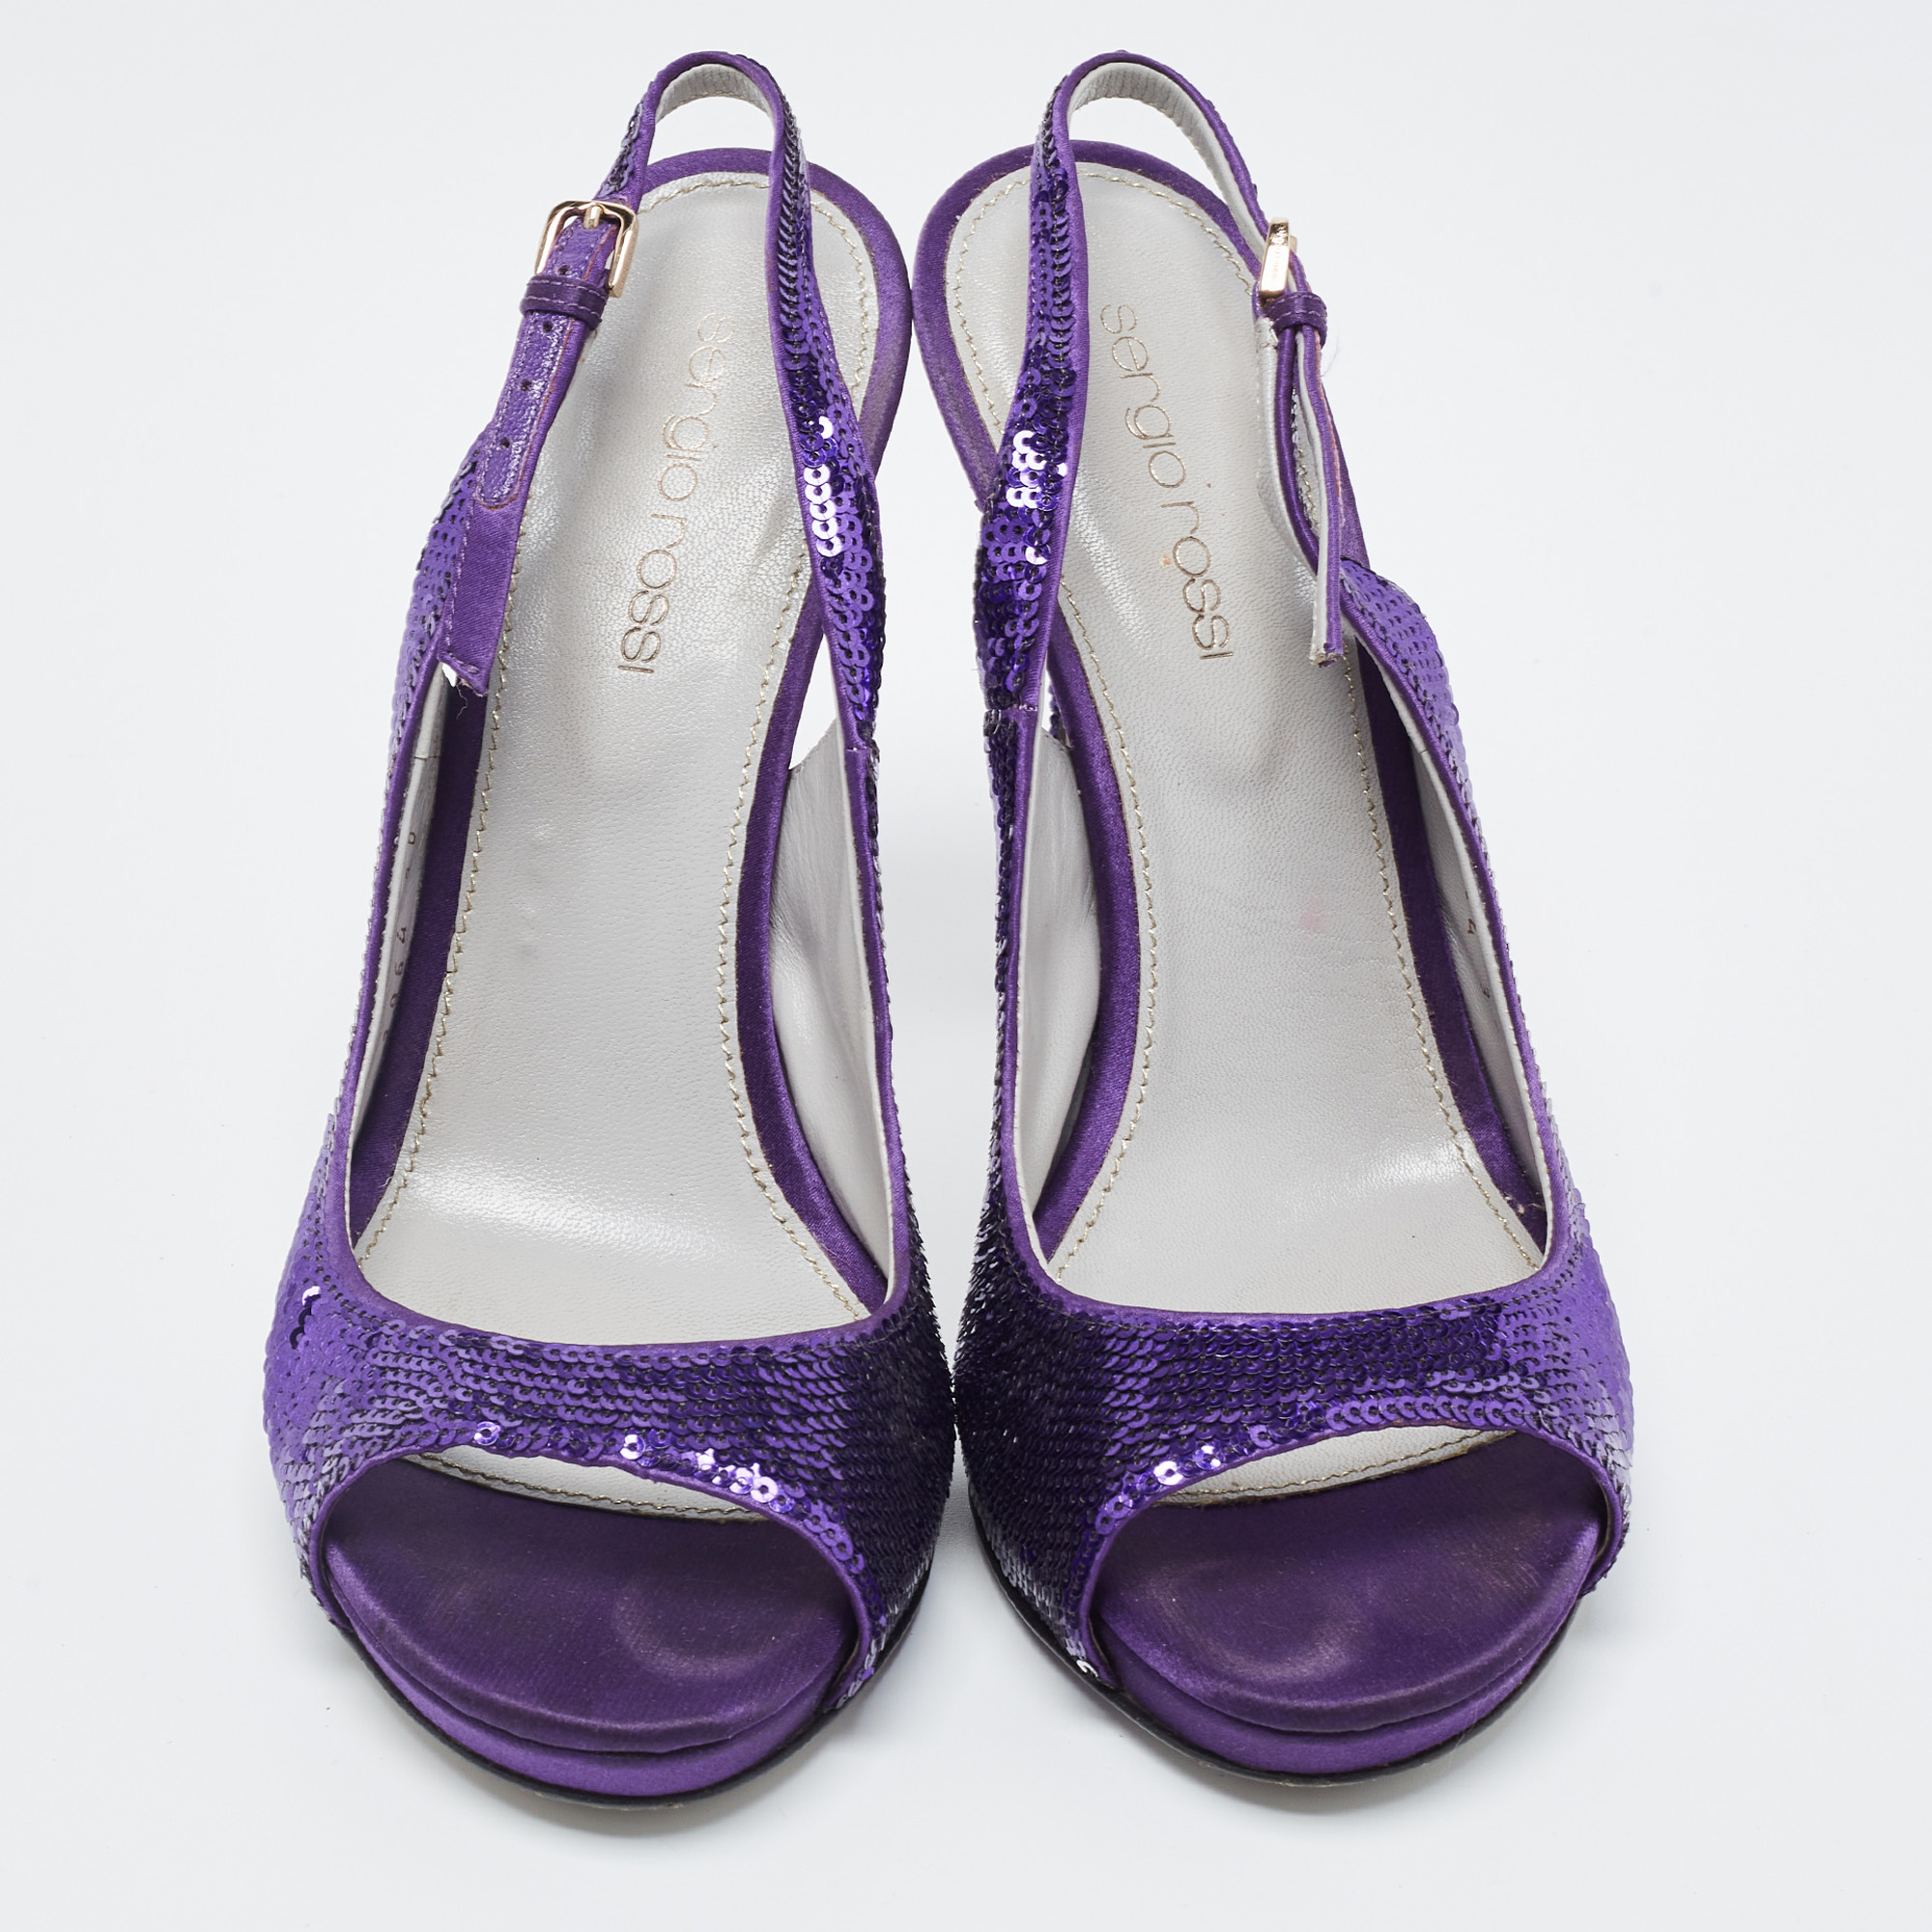 Sergio Rossi Purple Sequin And Satin Slingback Sandals Size 36